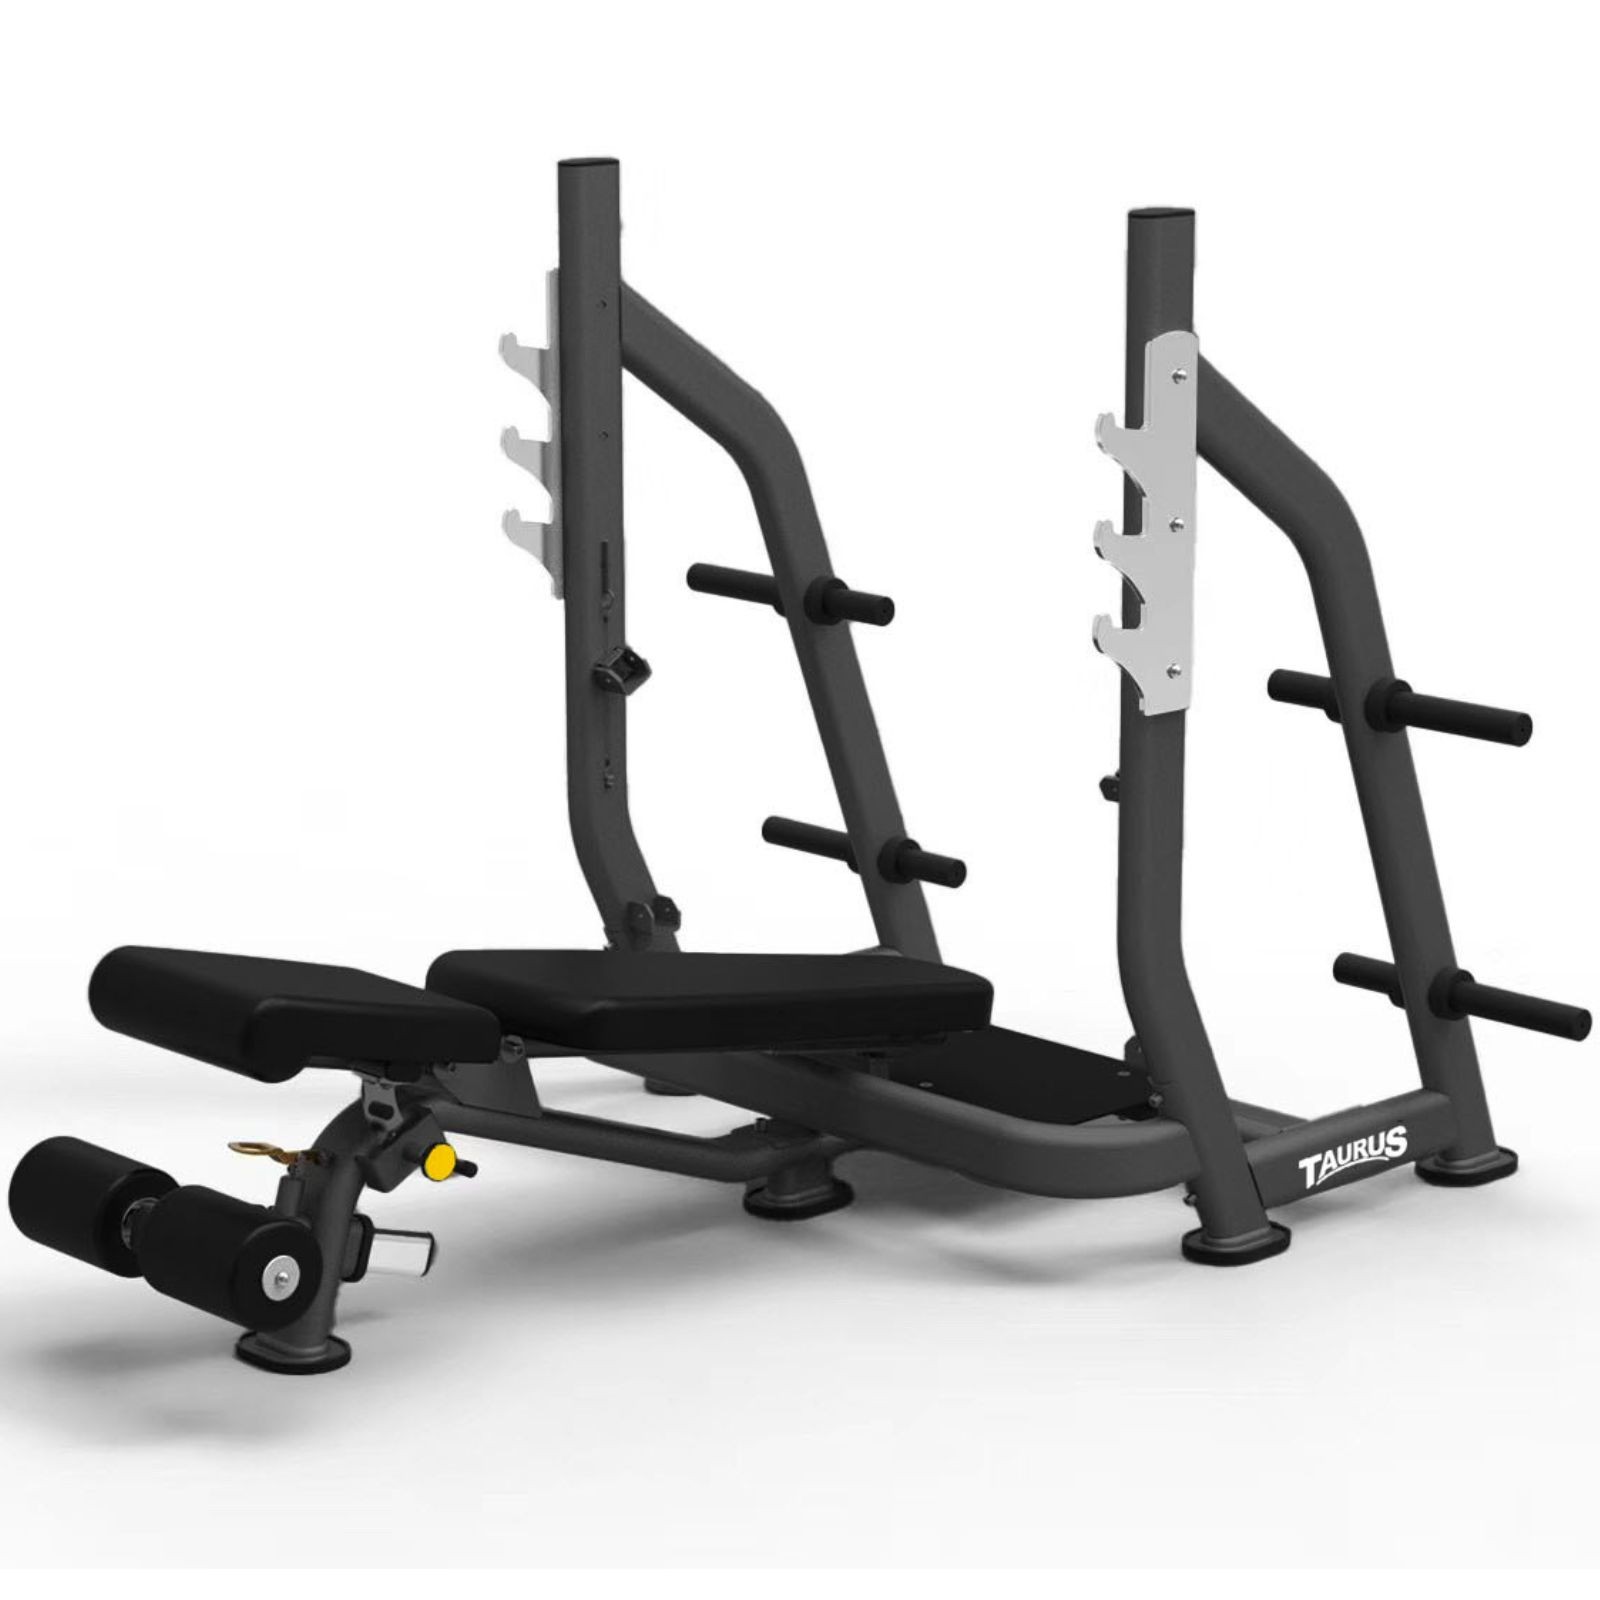 Taurus Elite Olympic Adjustable FID Bench – Durable and Comfortable Equipment for Commercial Use